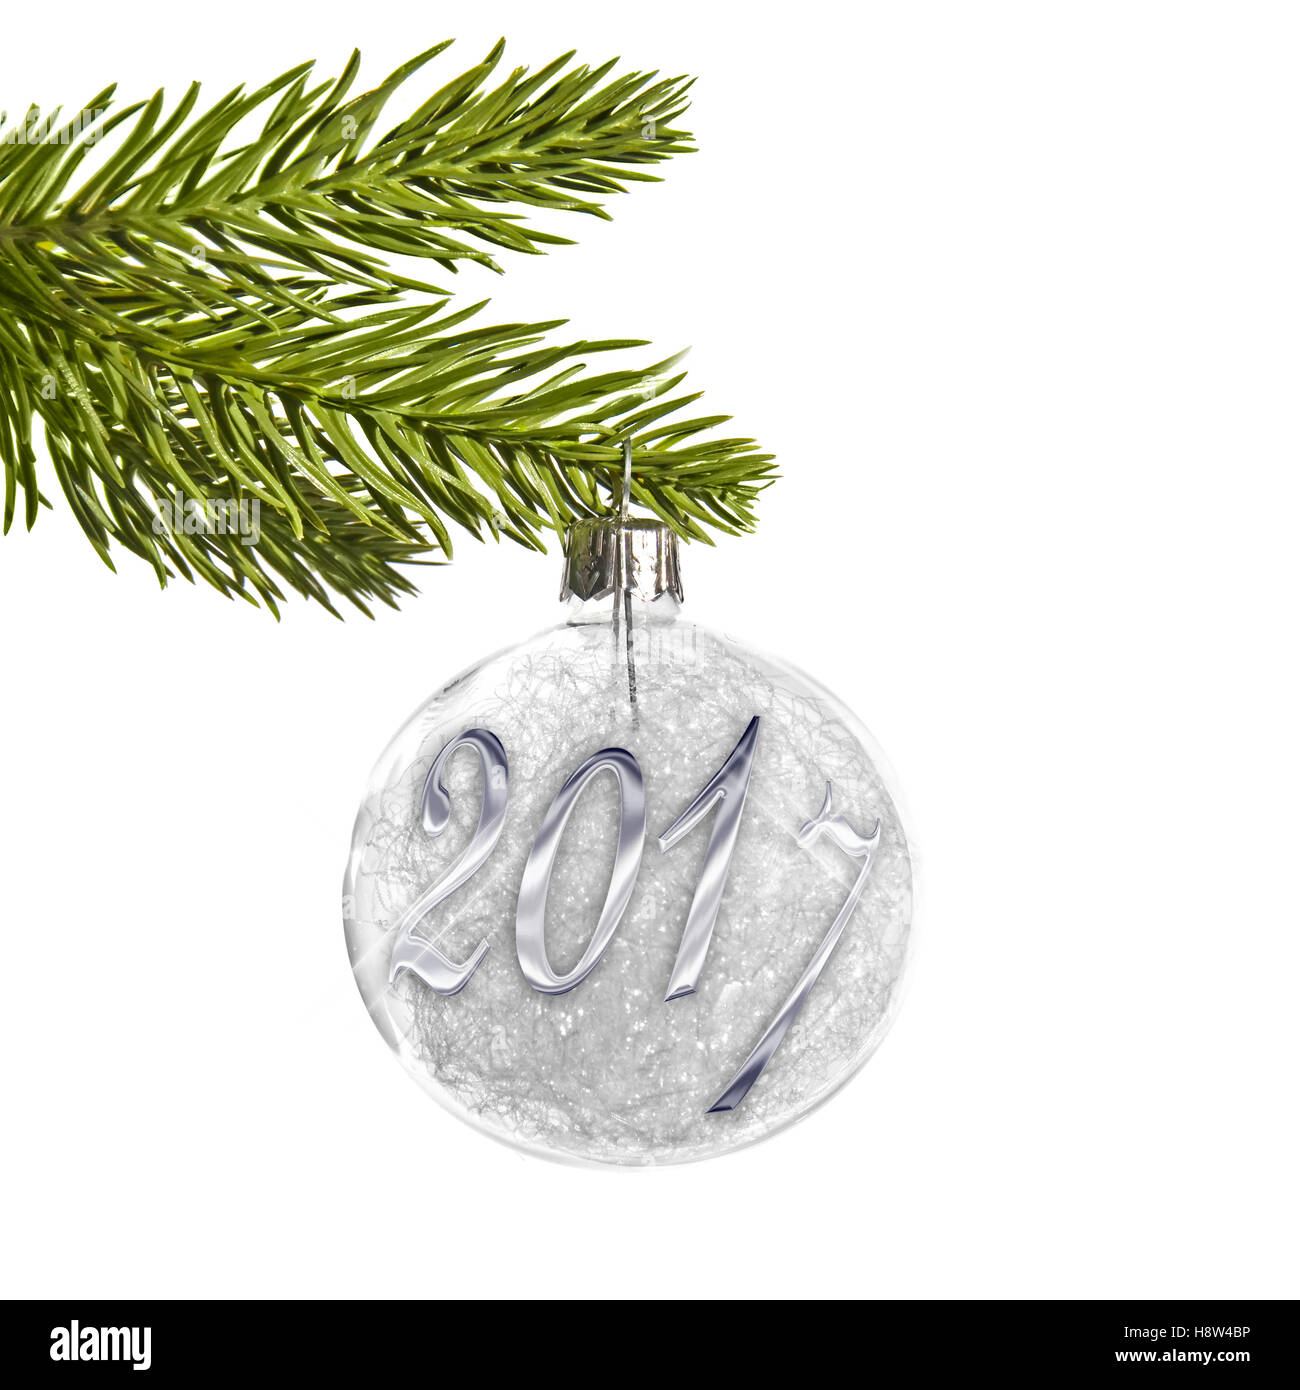 2017 on a silver christmas ball hanging from a branch isolated on white Stock Photo